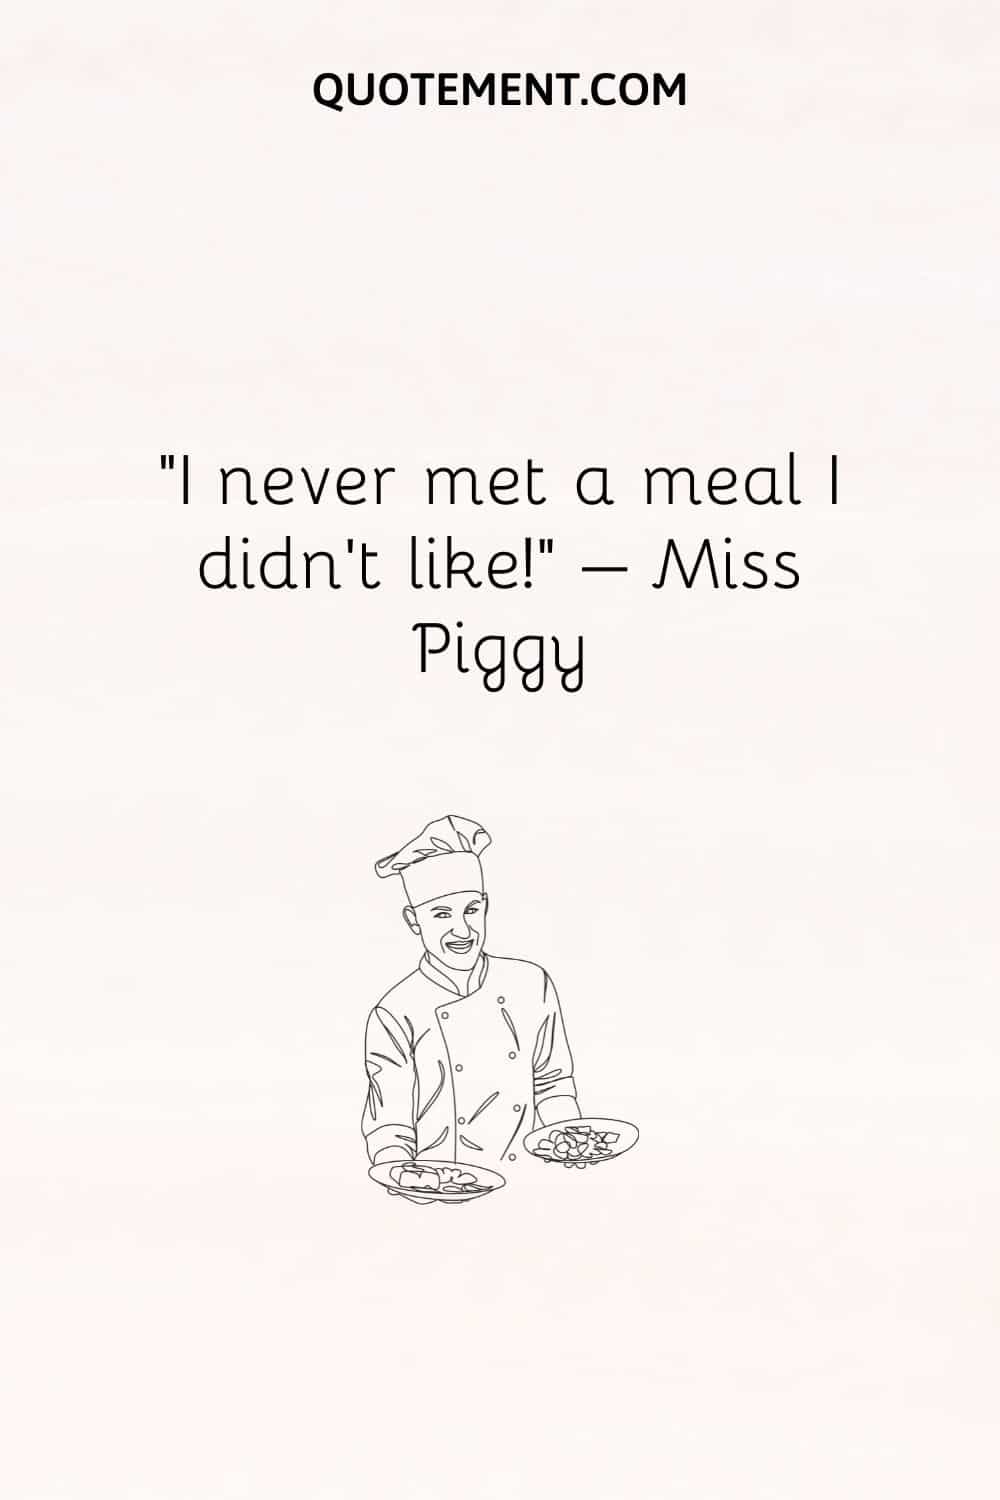 I never met a meal I didn’t like